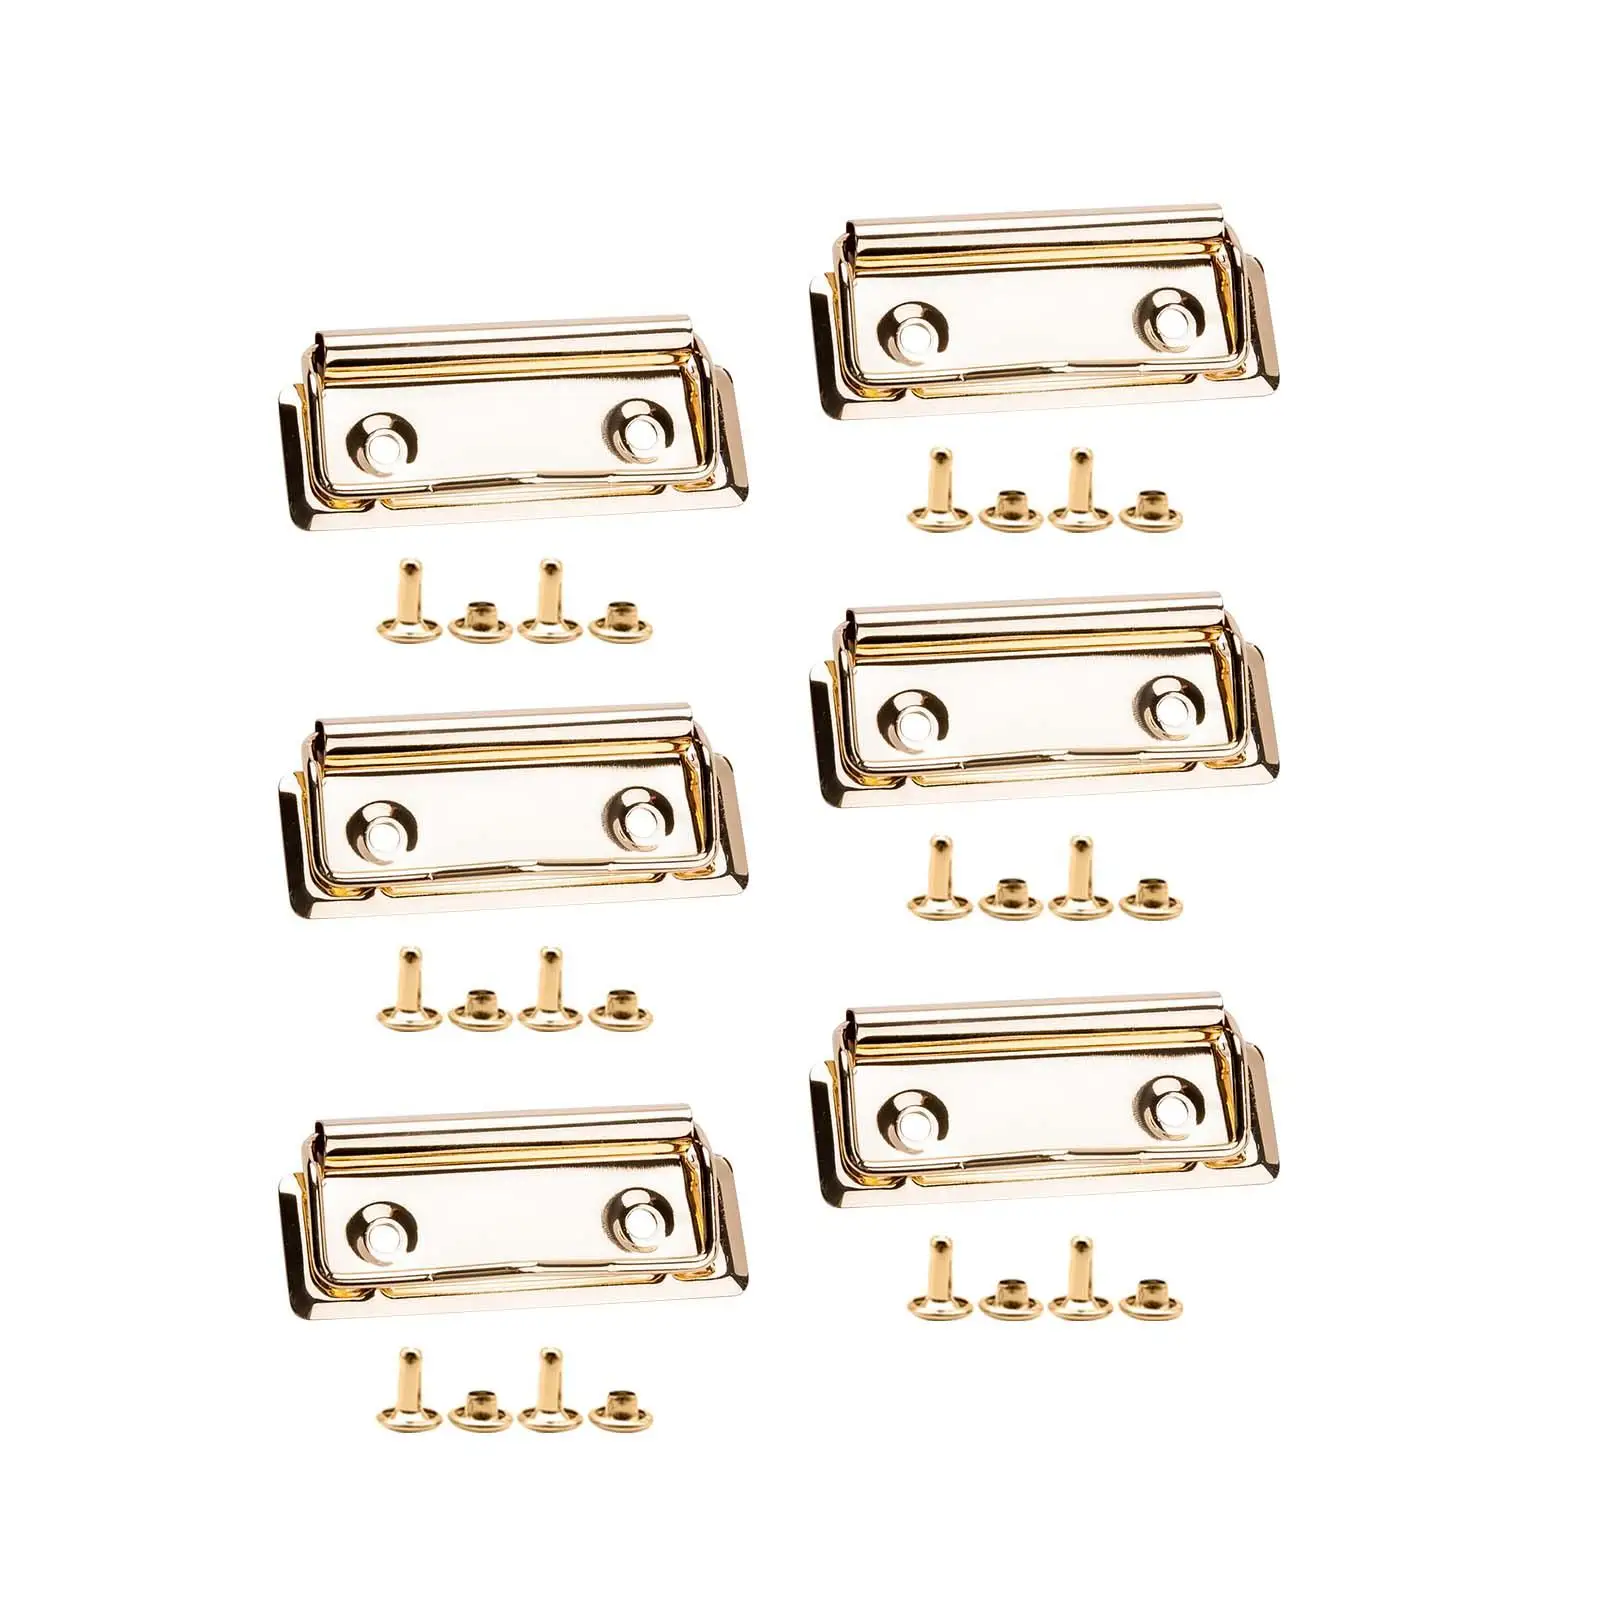 6Pcs Mountable Clipboard Clips Heavy Duty Metal Stationery Plate Holder Document File Board Clips for Stationery Supplies School